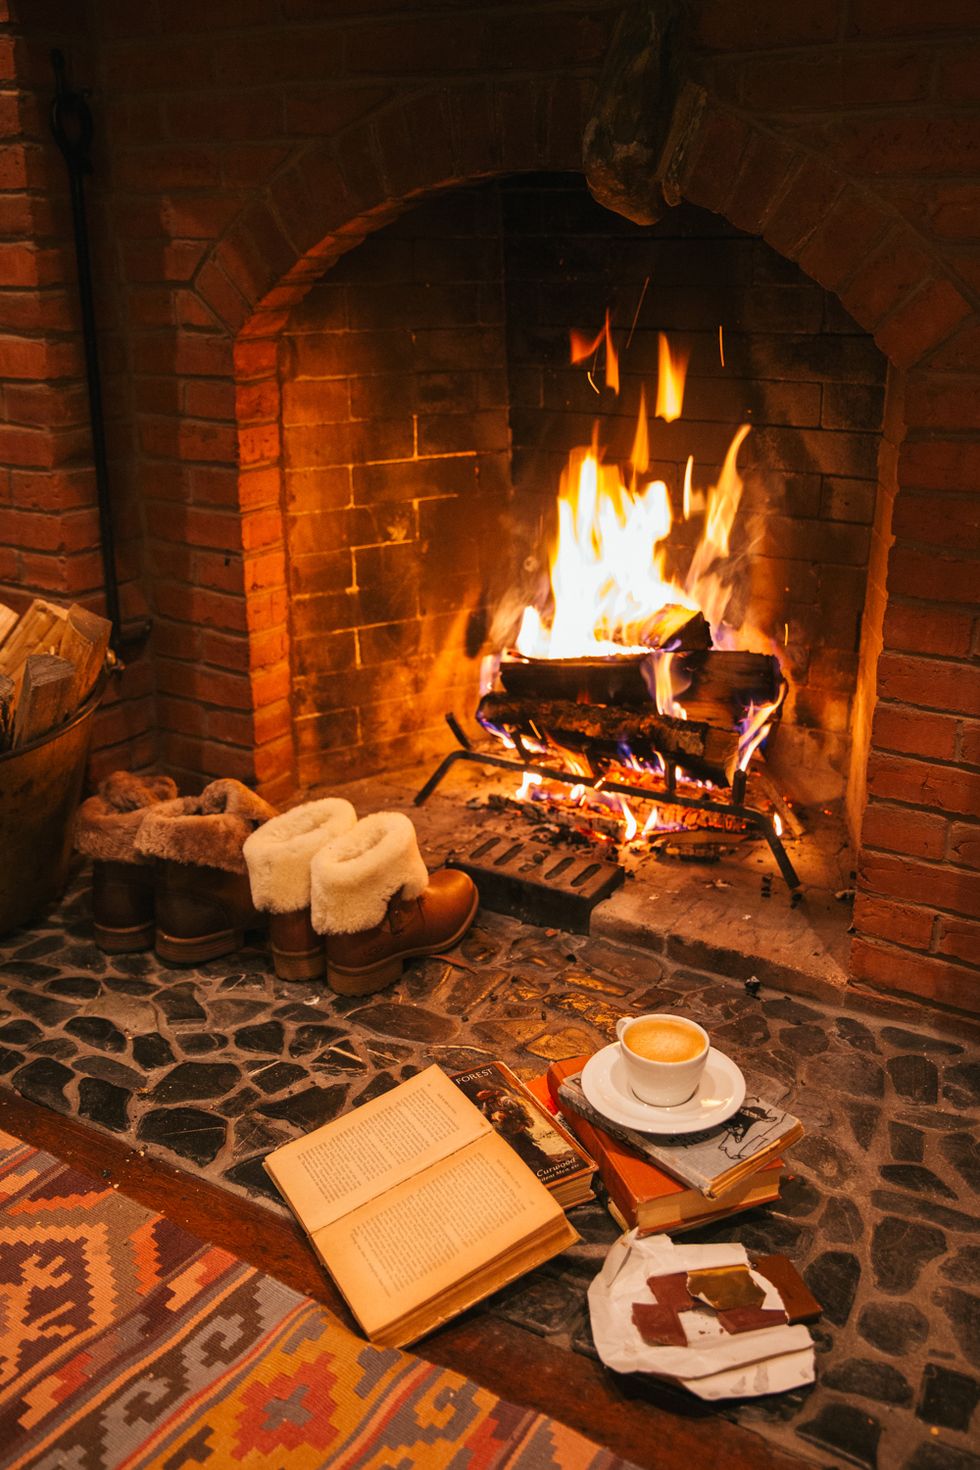 Wood, Hearth, Heat, Flame, Fire, Masonry oven, Gas, Brick, Fireplace, Home accessories, 